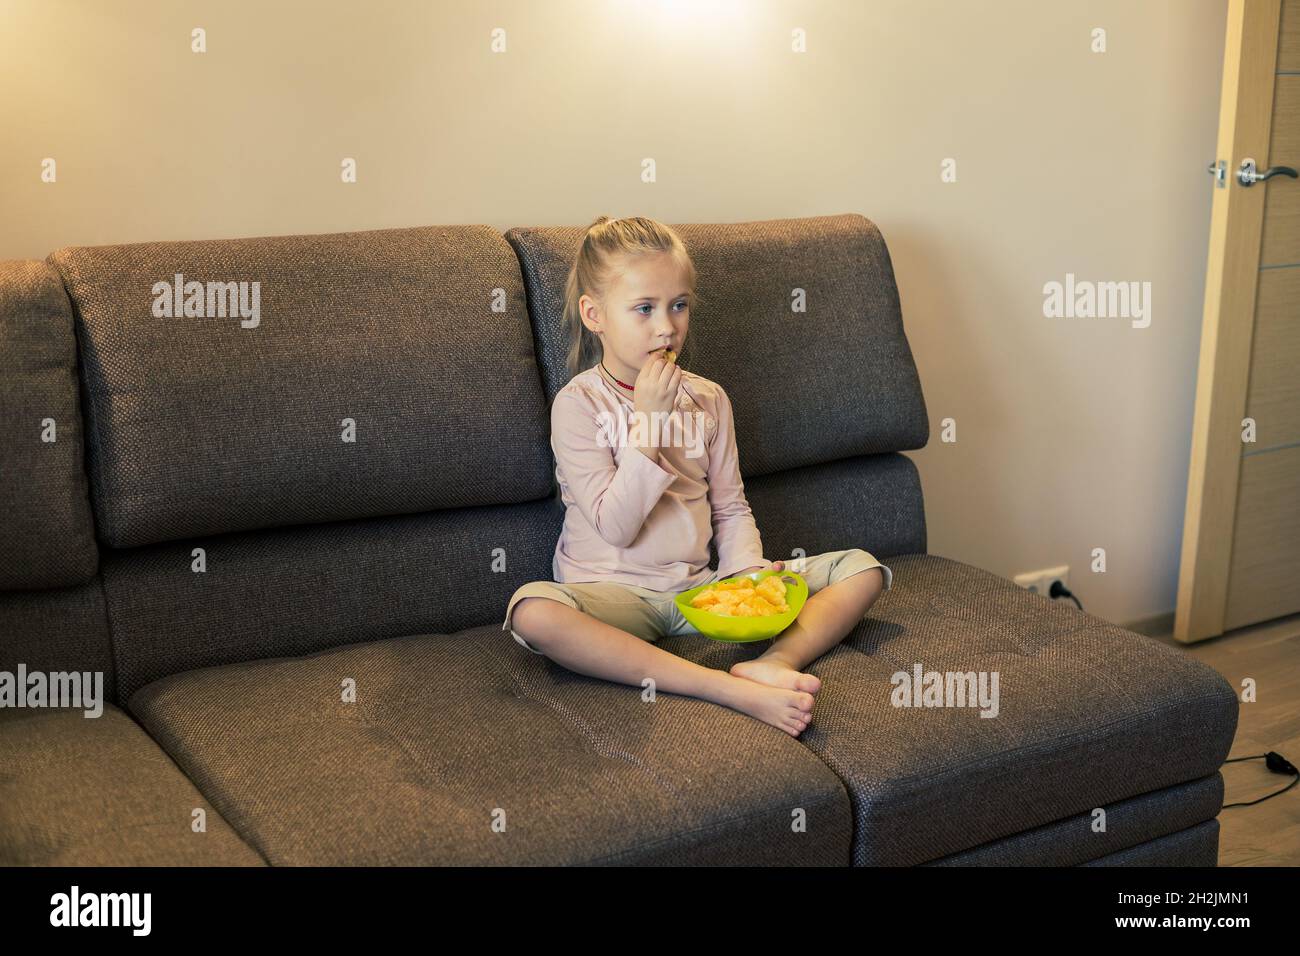 Beautiful little girl eating unhealthy food while watching TV at the sofa Stock Photo